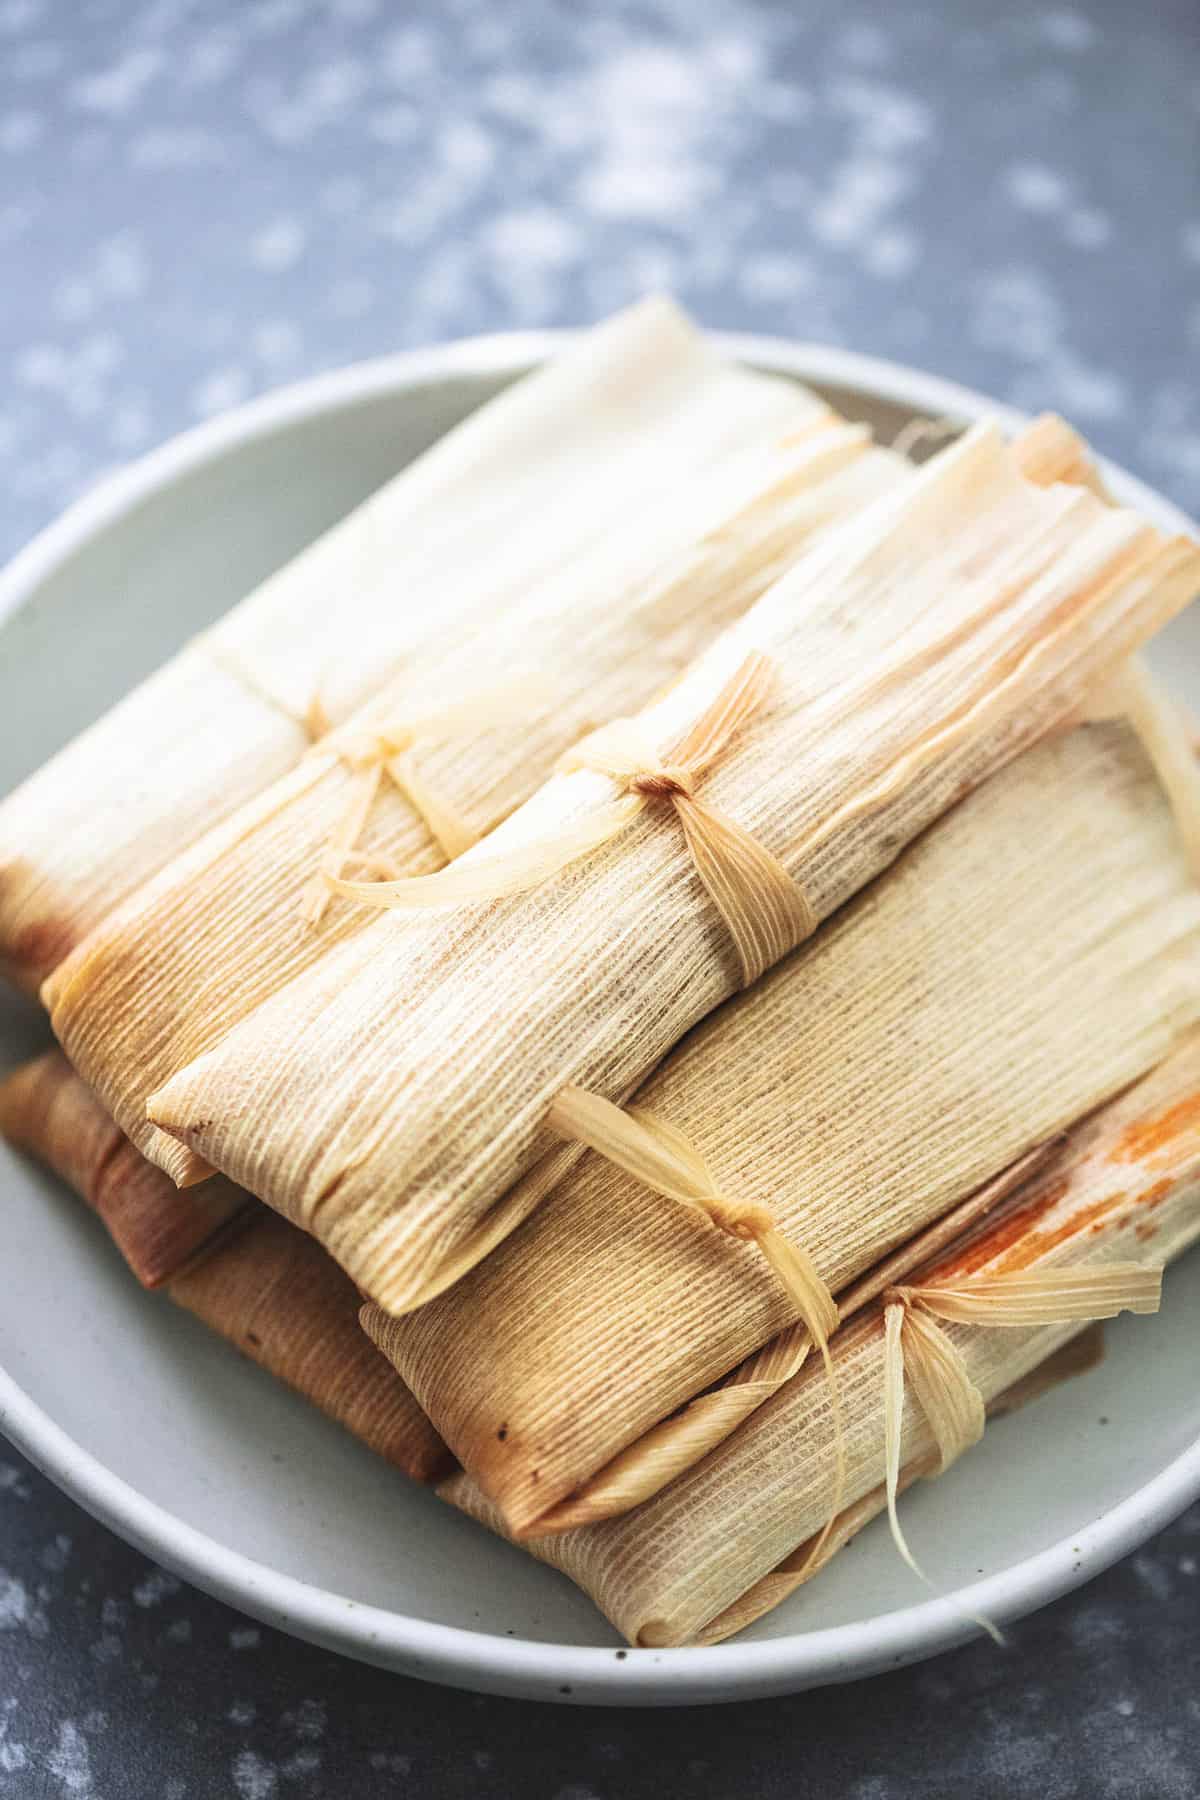 wrapped tamales on a plate.